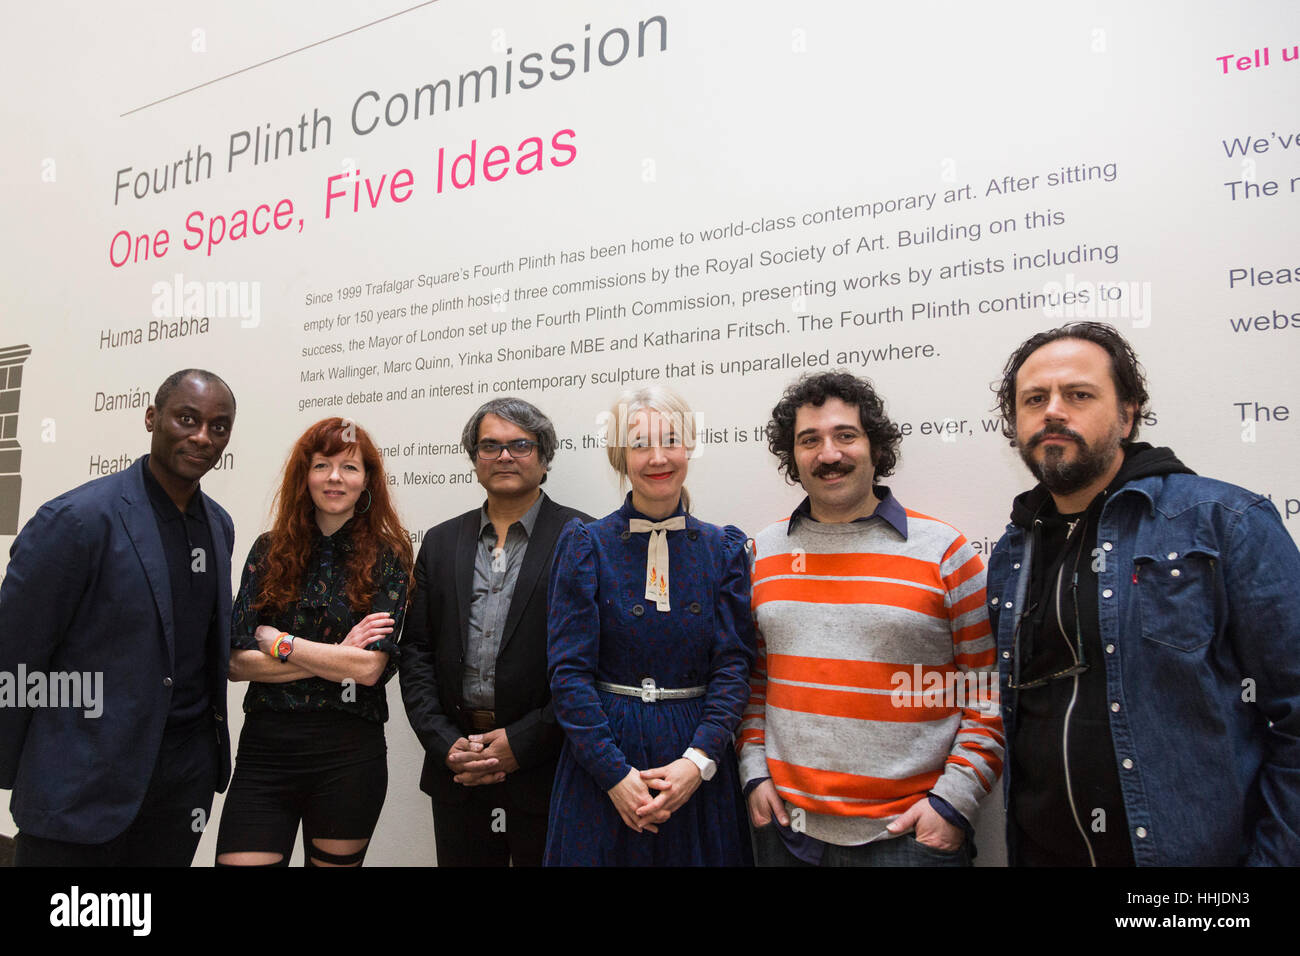 London, UK. 19 January 2017. L-R: Ekow Eshun, Heather Phillipson, Shuddhabrata Sengupta, Justine Simons, Michael Rakowitz, Damian Ortega. Artists Damian Ortega, Heather Phillipson, Michael Rakowitz and Shuddhabrata Senguppta from Raqs Media Collective join Justine Simons, Deputy Mayor for Culture and Creative Industries, and Ekow Eshun, Chair of the Fourth Plinth Commission Panet, at the press preview for the Shortlist Exhibition. Maquettes of the shortlisted works are on display at the National Gallery until 26 March 2017. The proposals on display are Untitled by Huma Bhabha, High Way/Higher Stock Photo